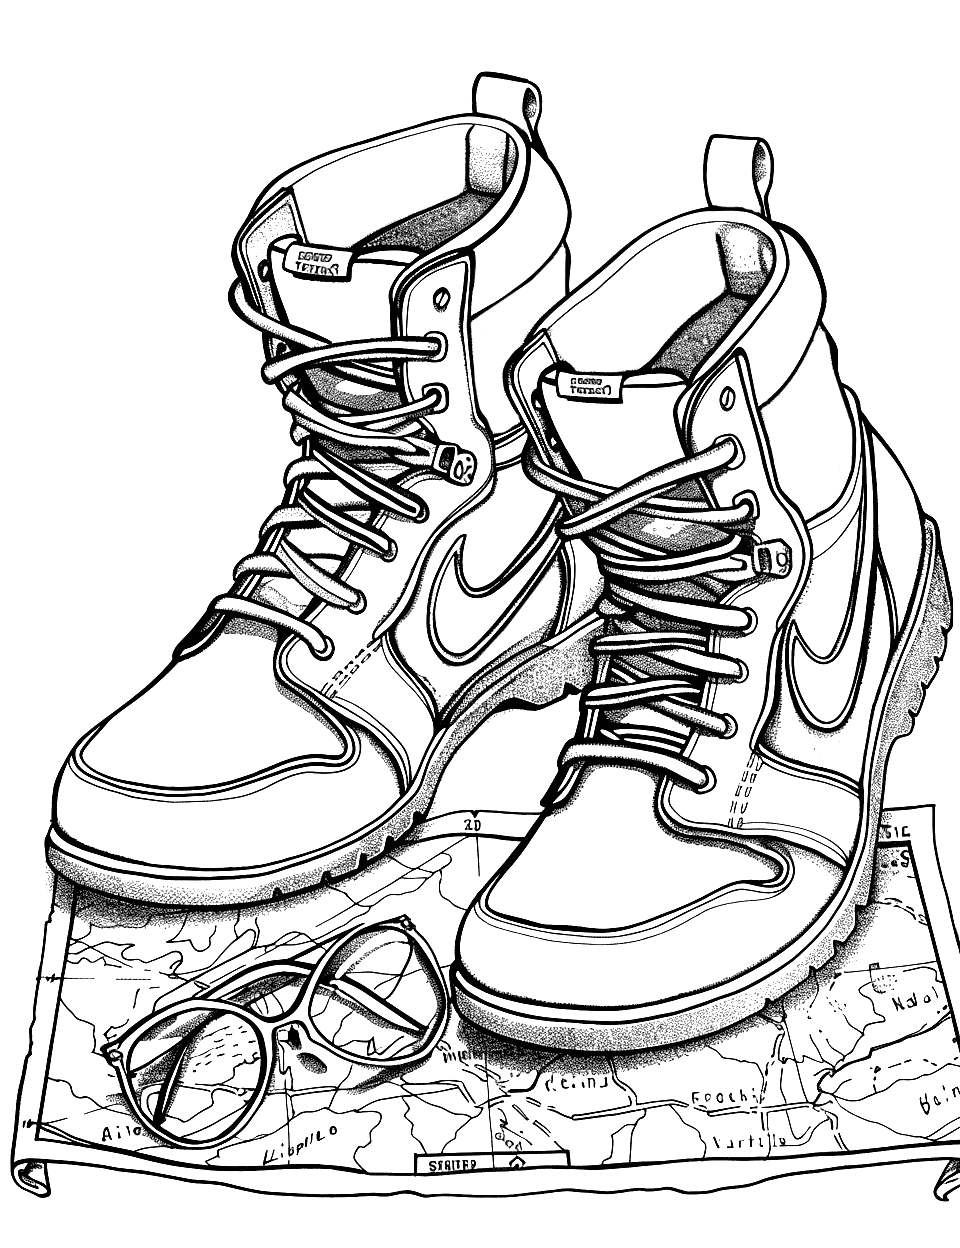 Motorcycle Boots on a Road Trip Shoe Coloring Page - Sturdy motorcycle boots on top of a road map and sunglasses.